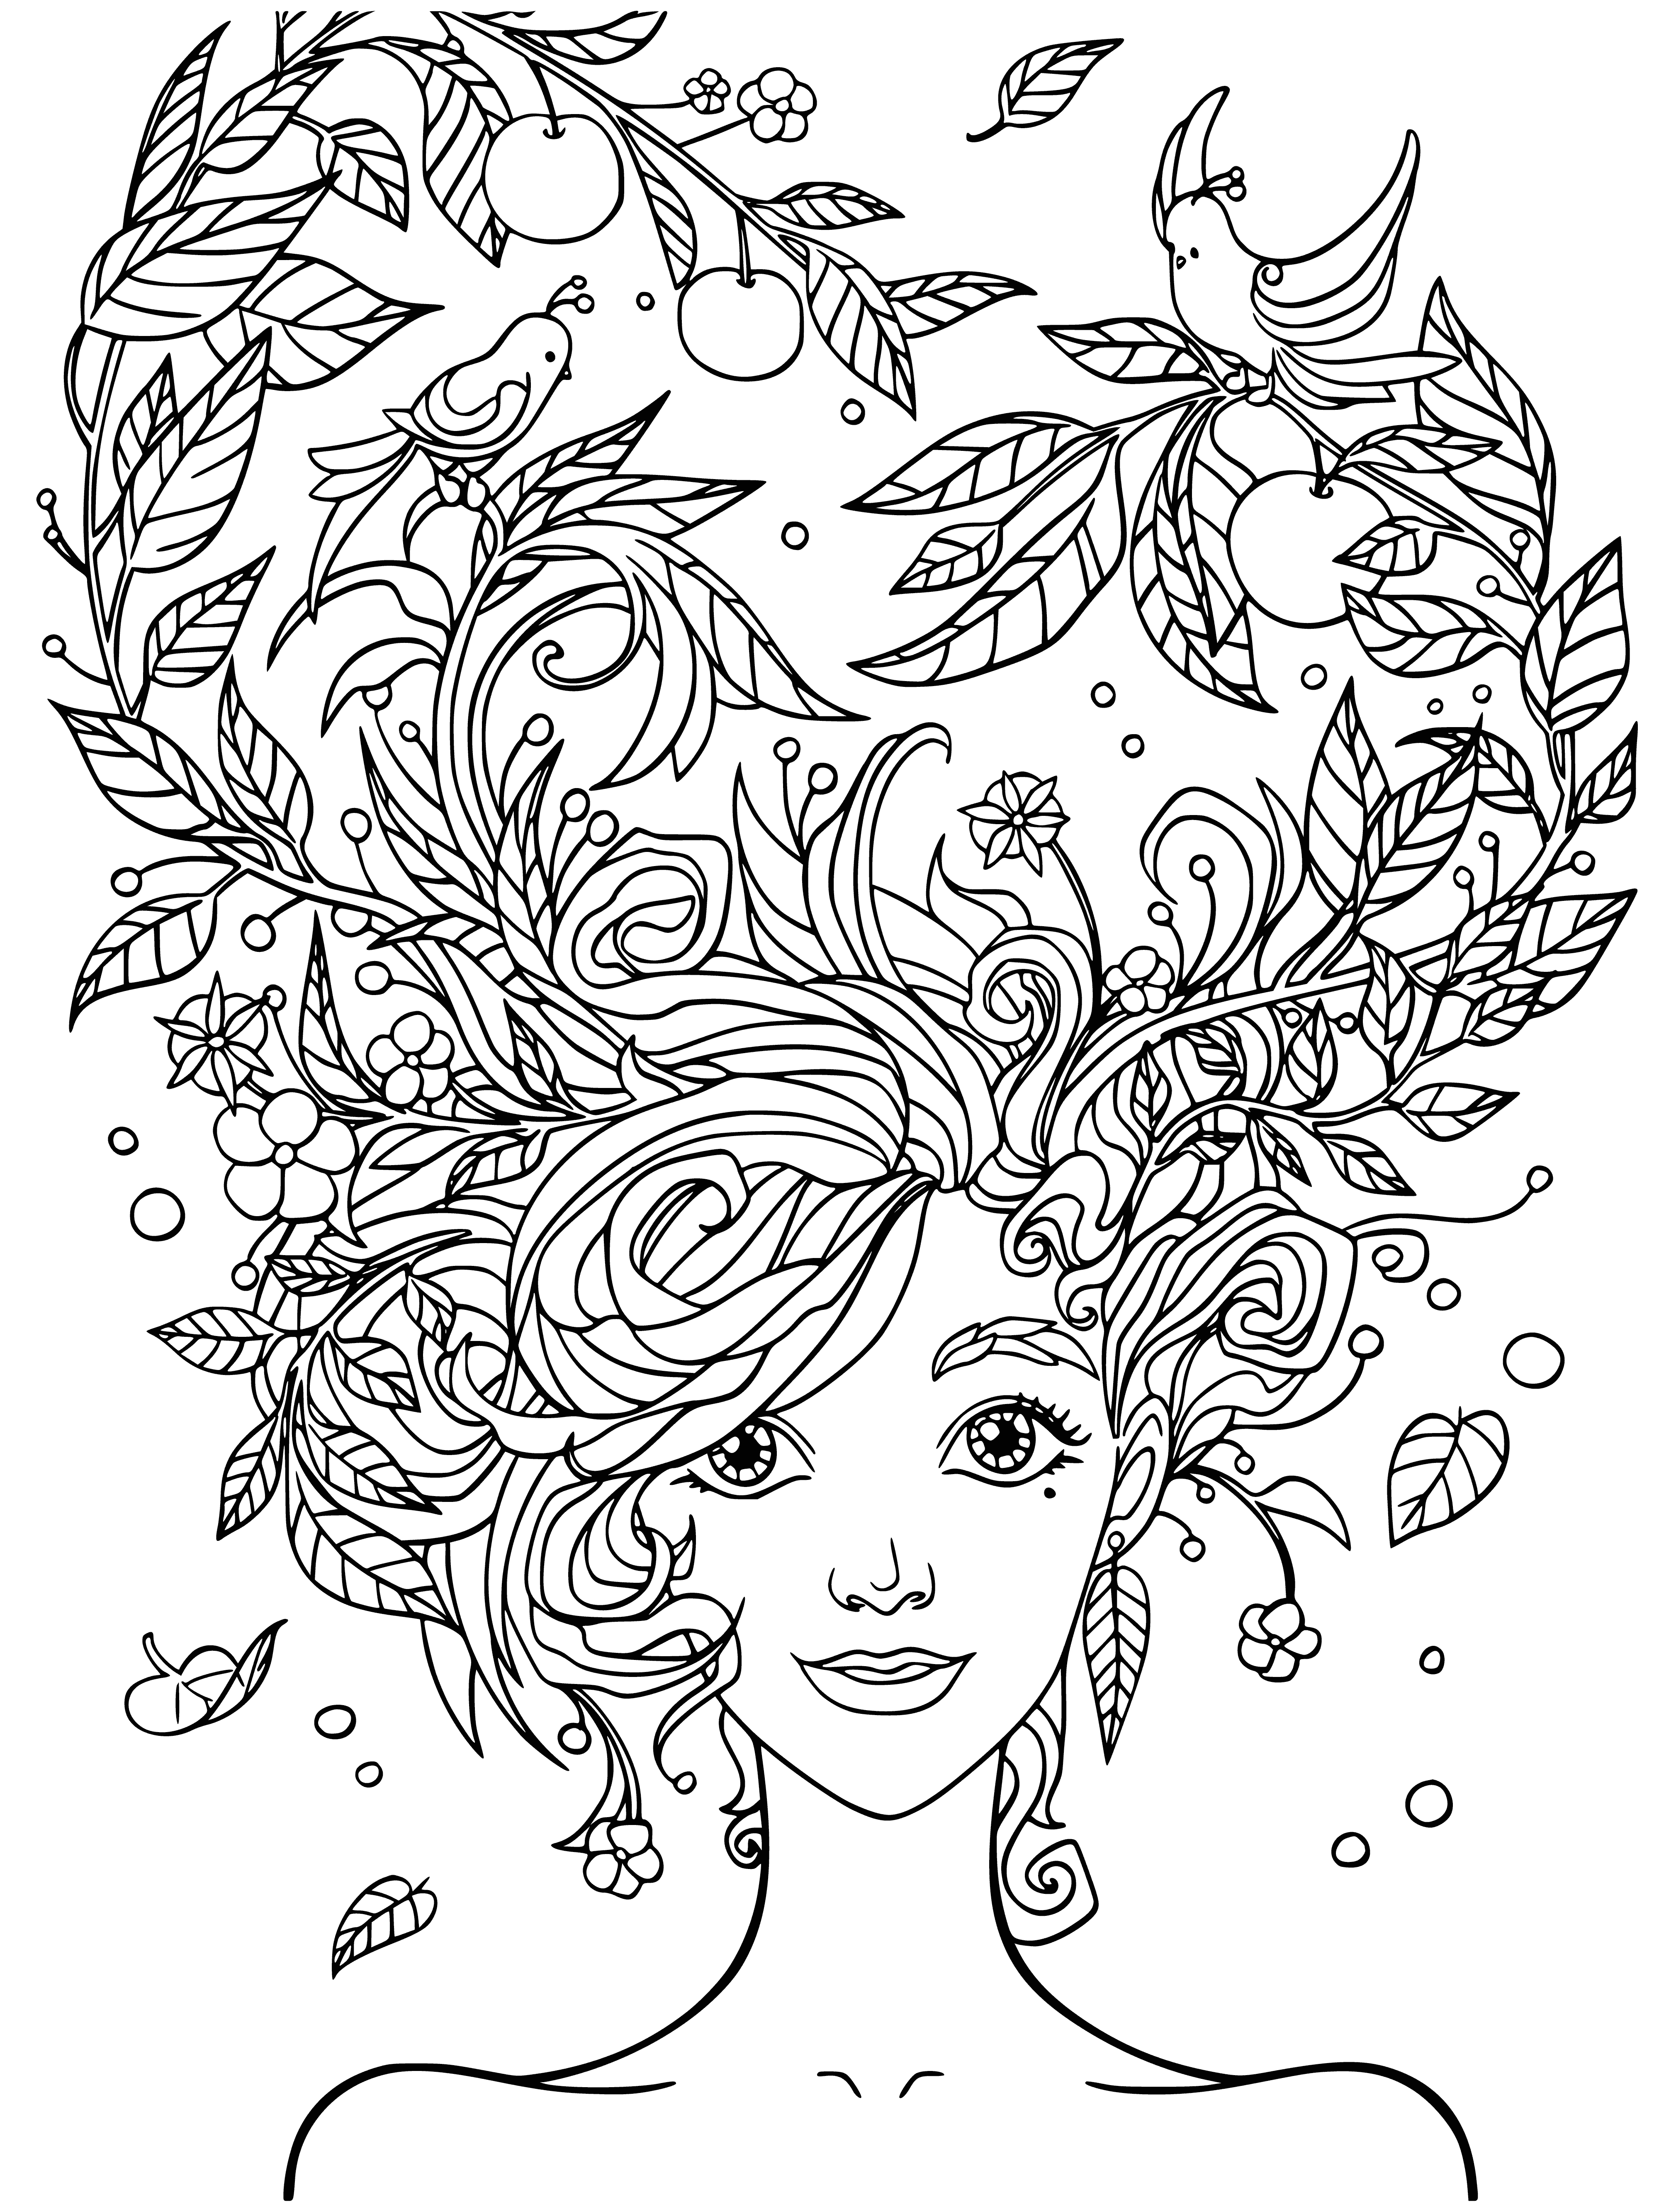 coloring page: Girl in blooming garden smiles cheerfully among flowers of all colors, surrounded by green field.